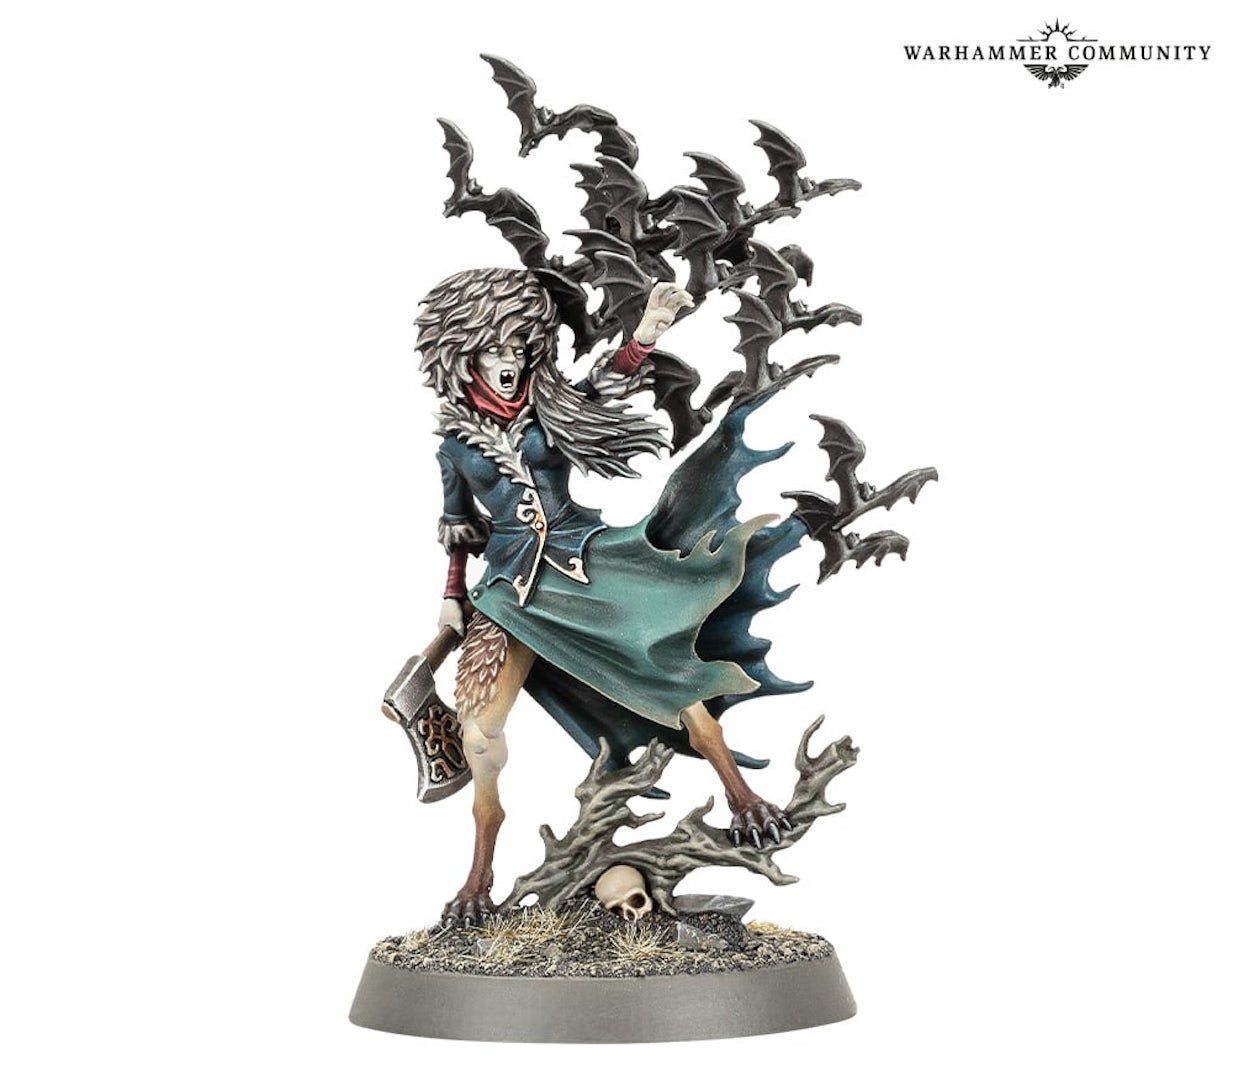 An image of the Warhammer Age of Sigmar Soulblight Gravelords model Ivya Volga